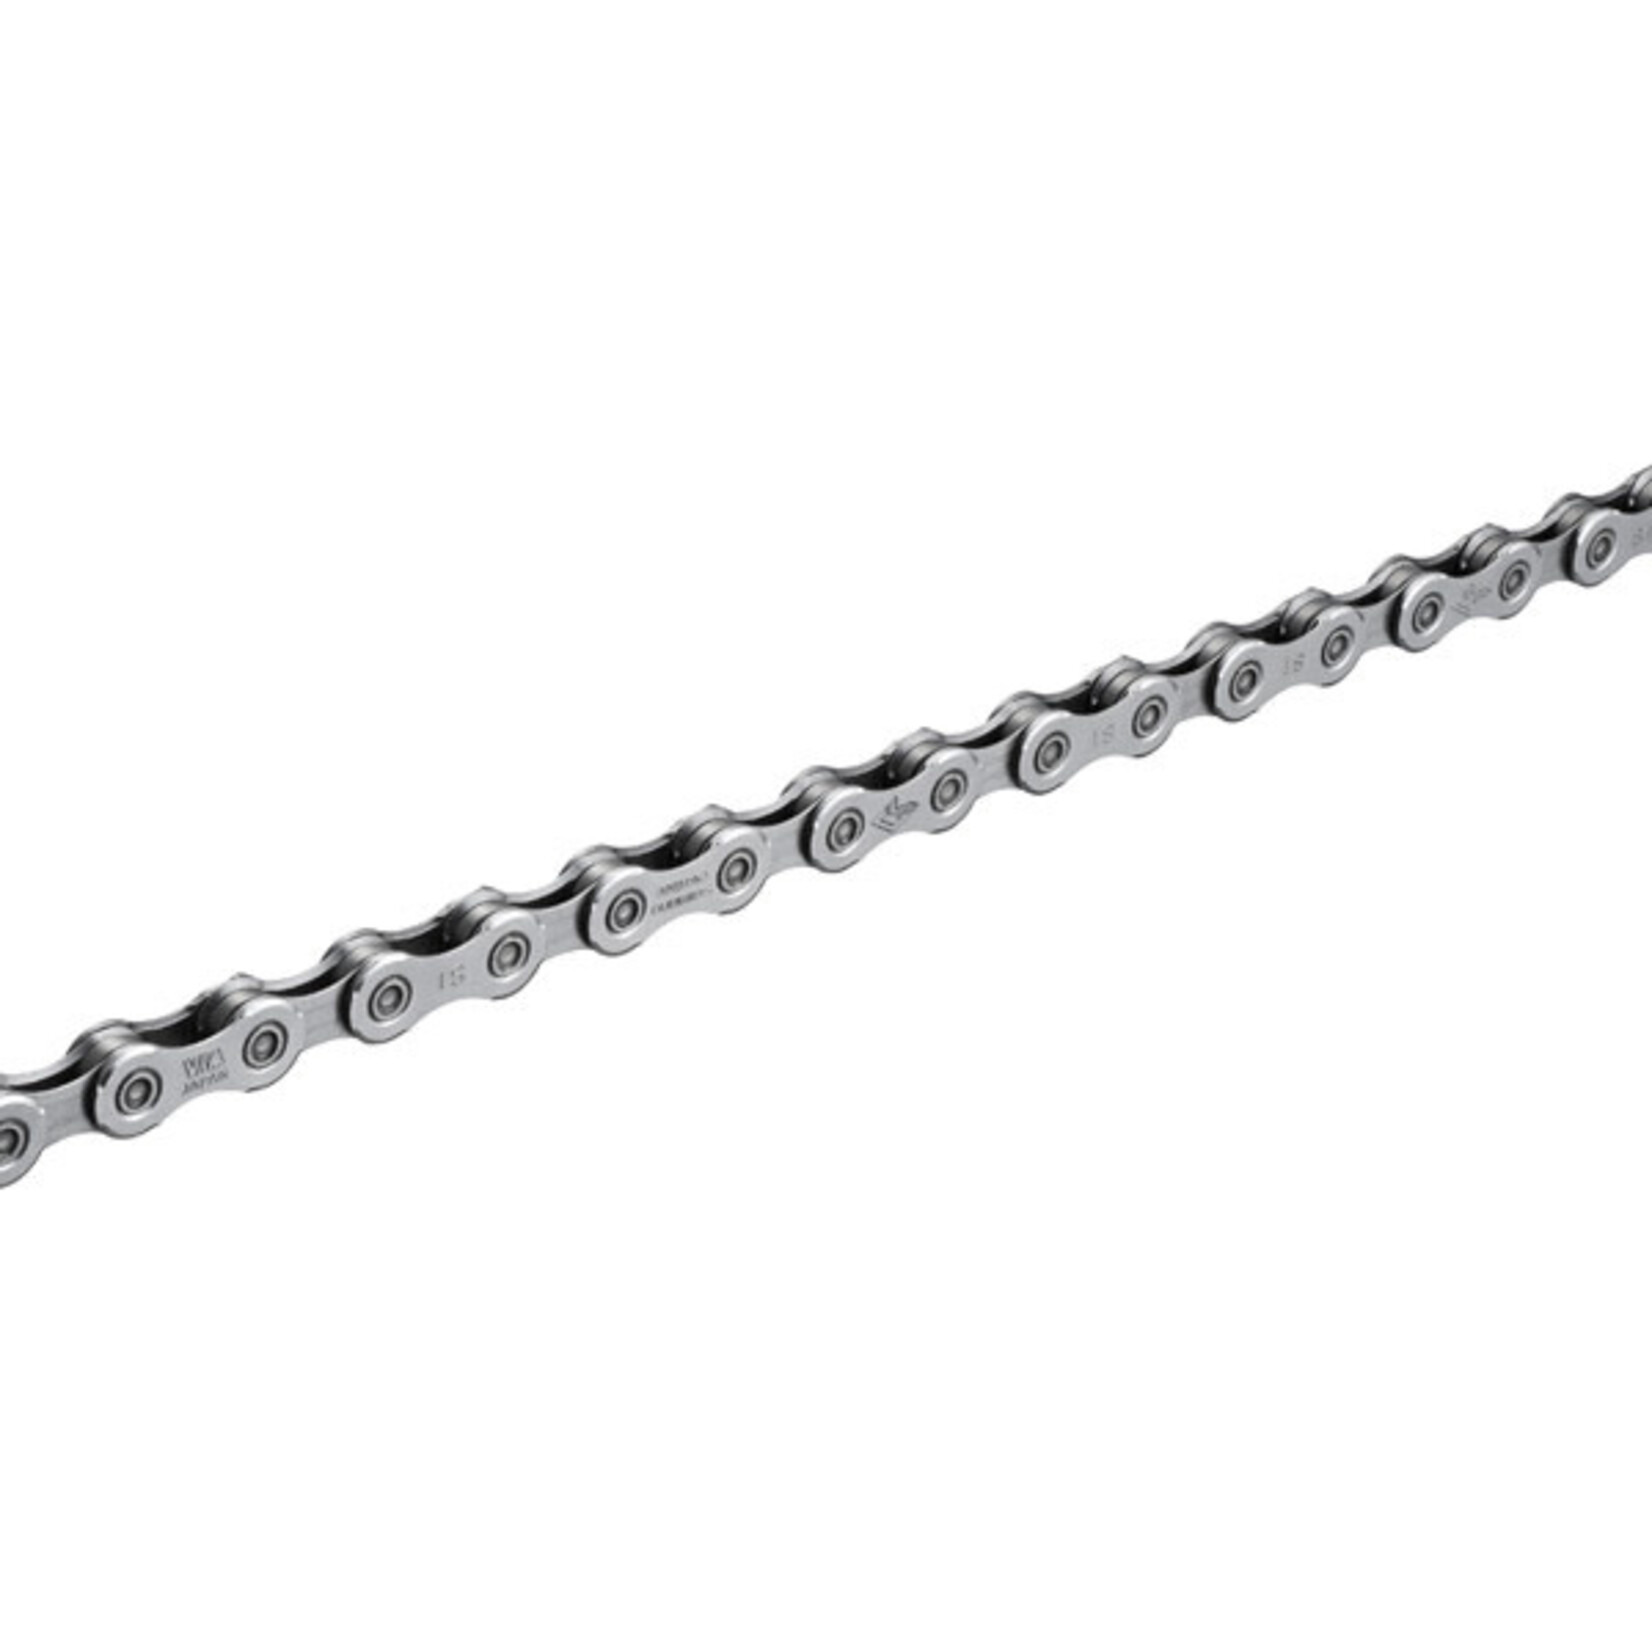 Shimano Deore Shimano CN-LG500 Link Glide HG-X chain with quick link, 9/10/11-speed, 138L